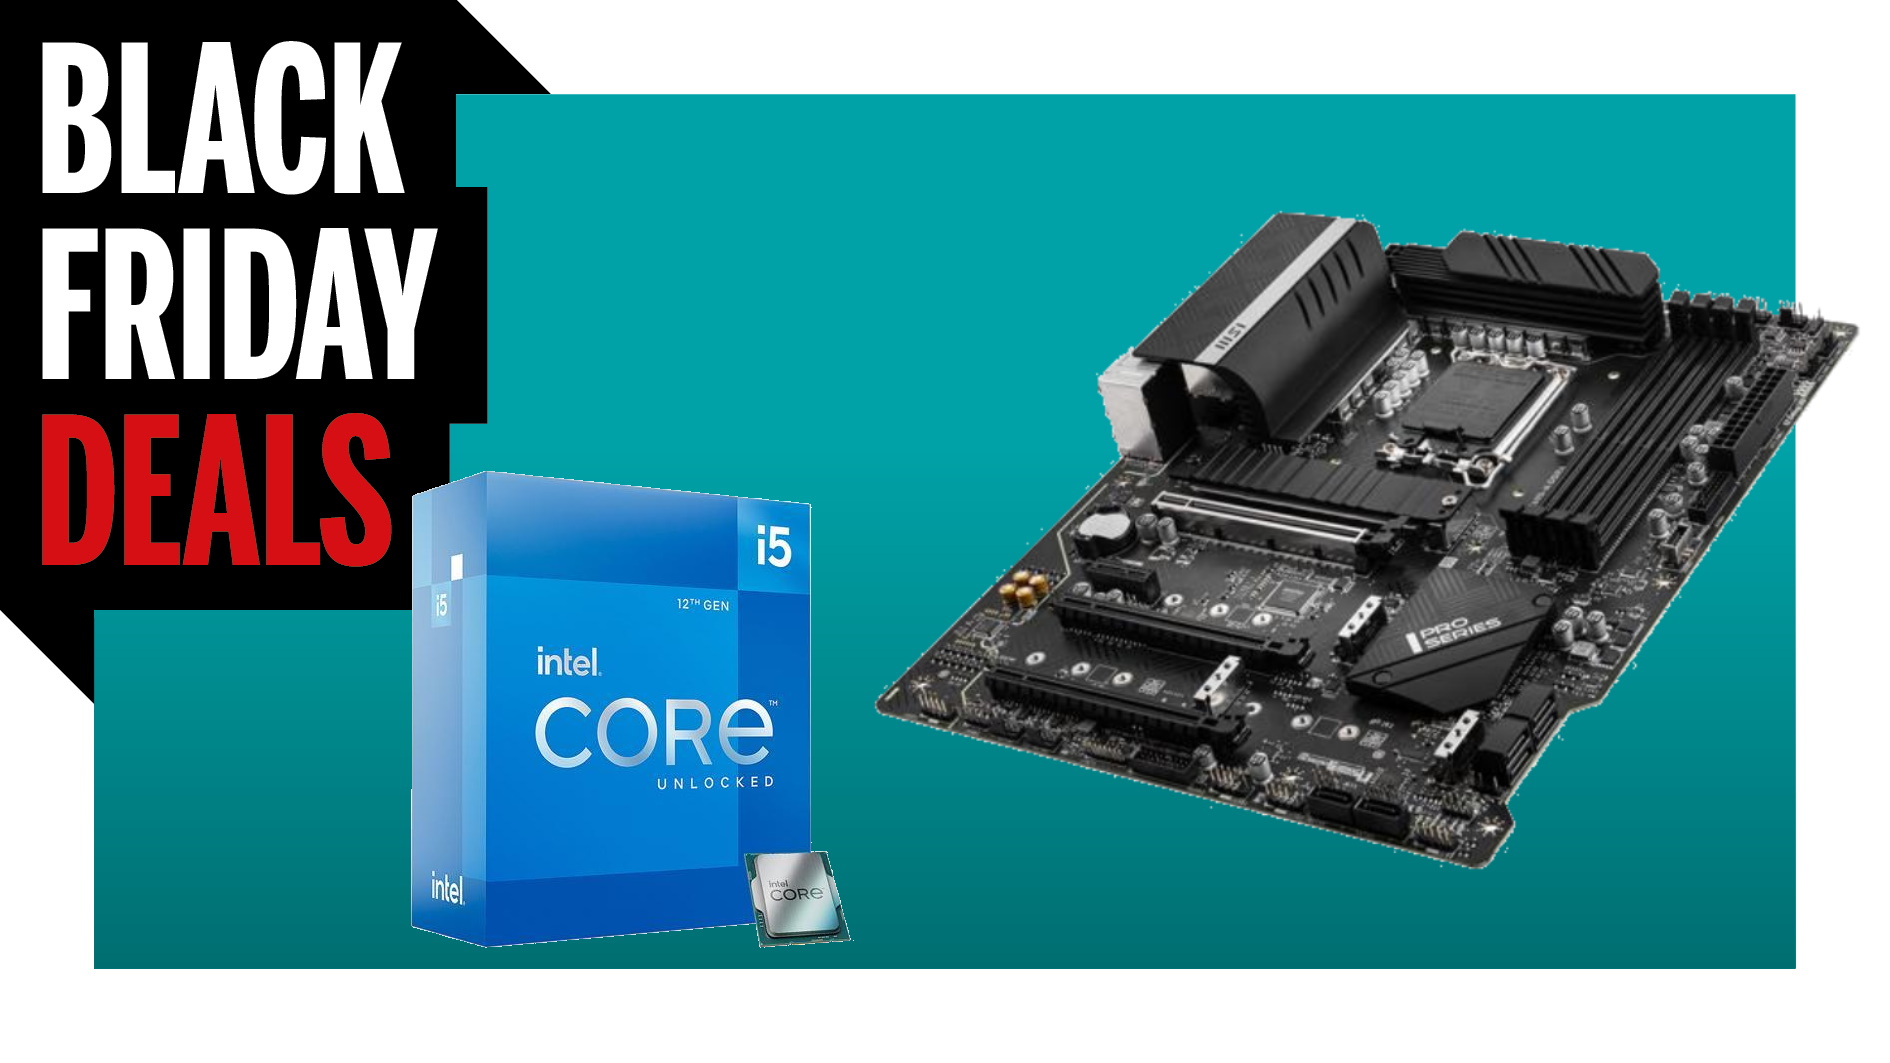 This $499 Intel Alder Lake Bundle Is The Best Upgrade You Can Make This Black Friday Deals Season thumbnail